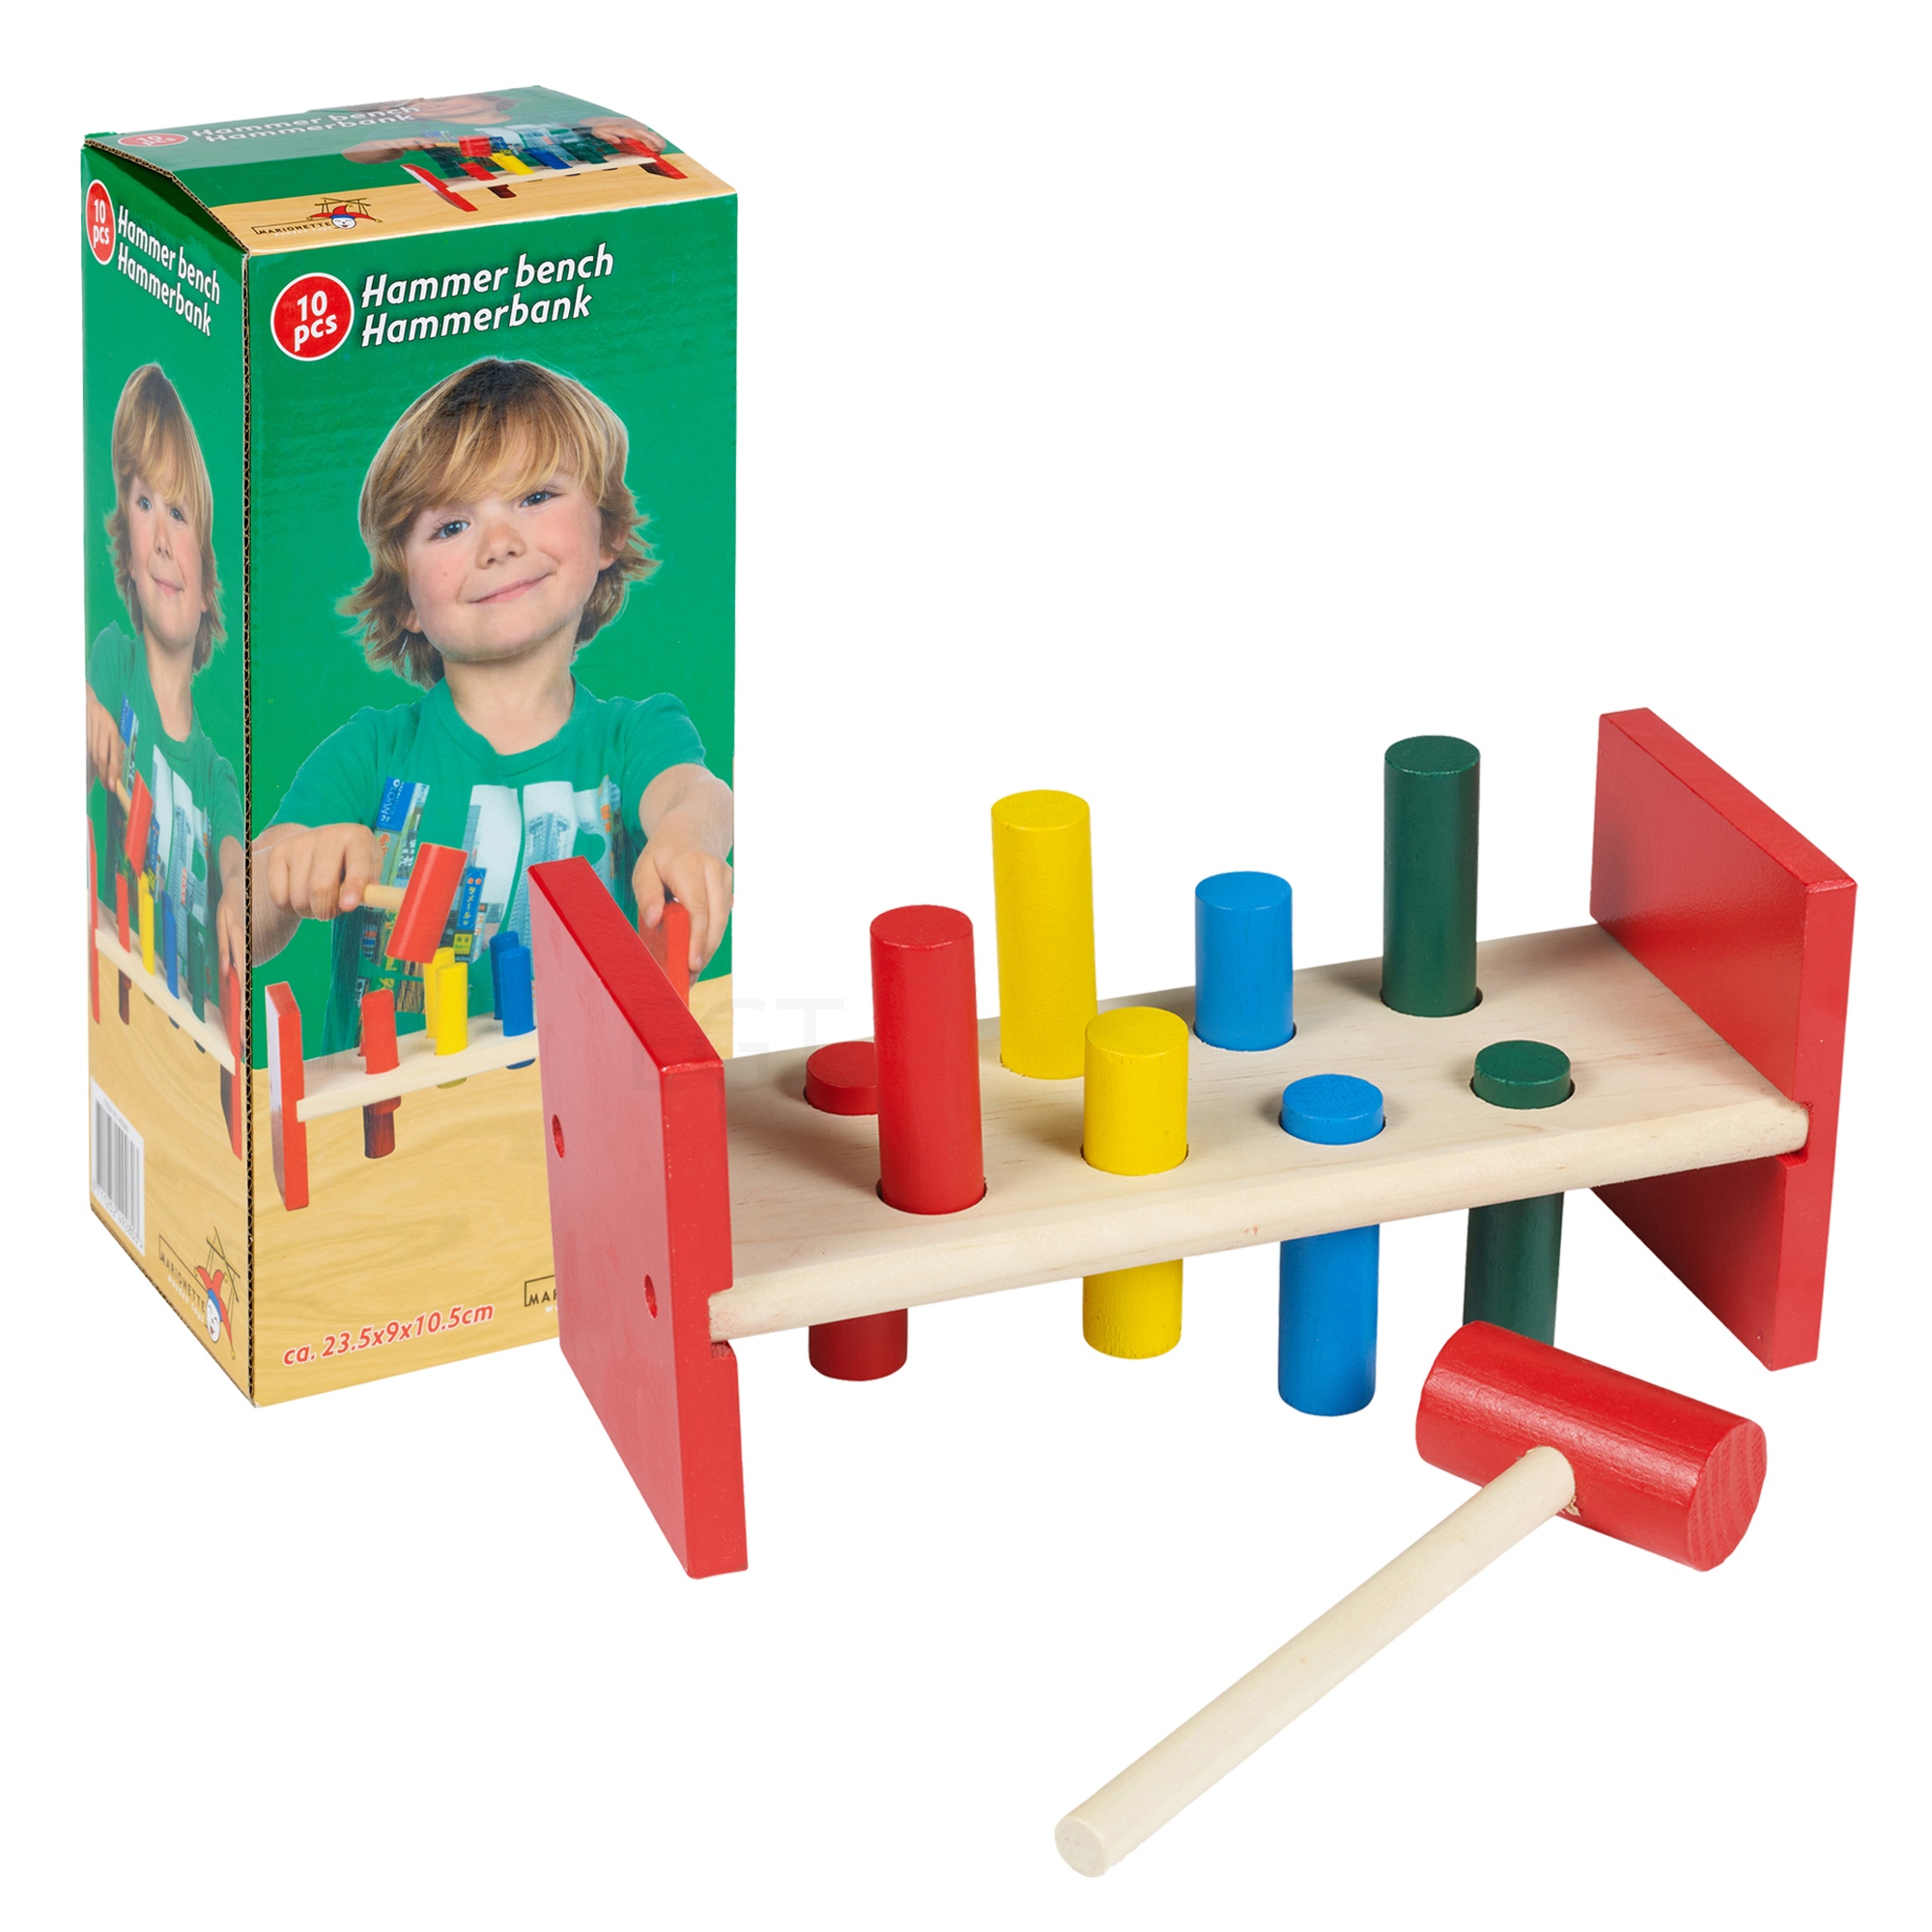 peg games for toddlers